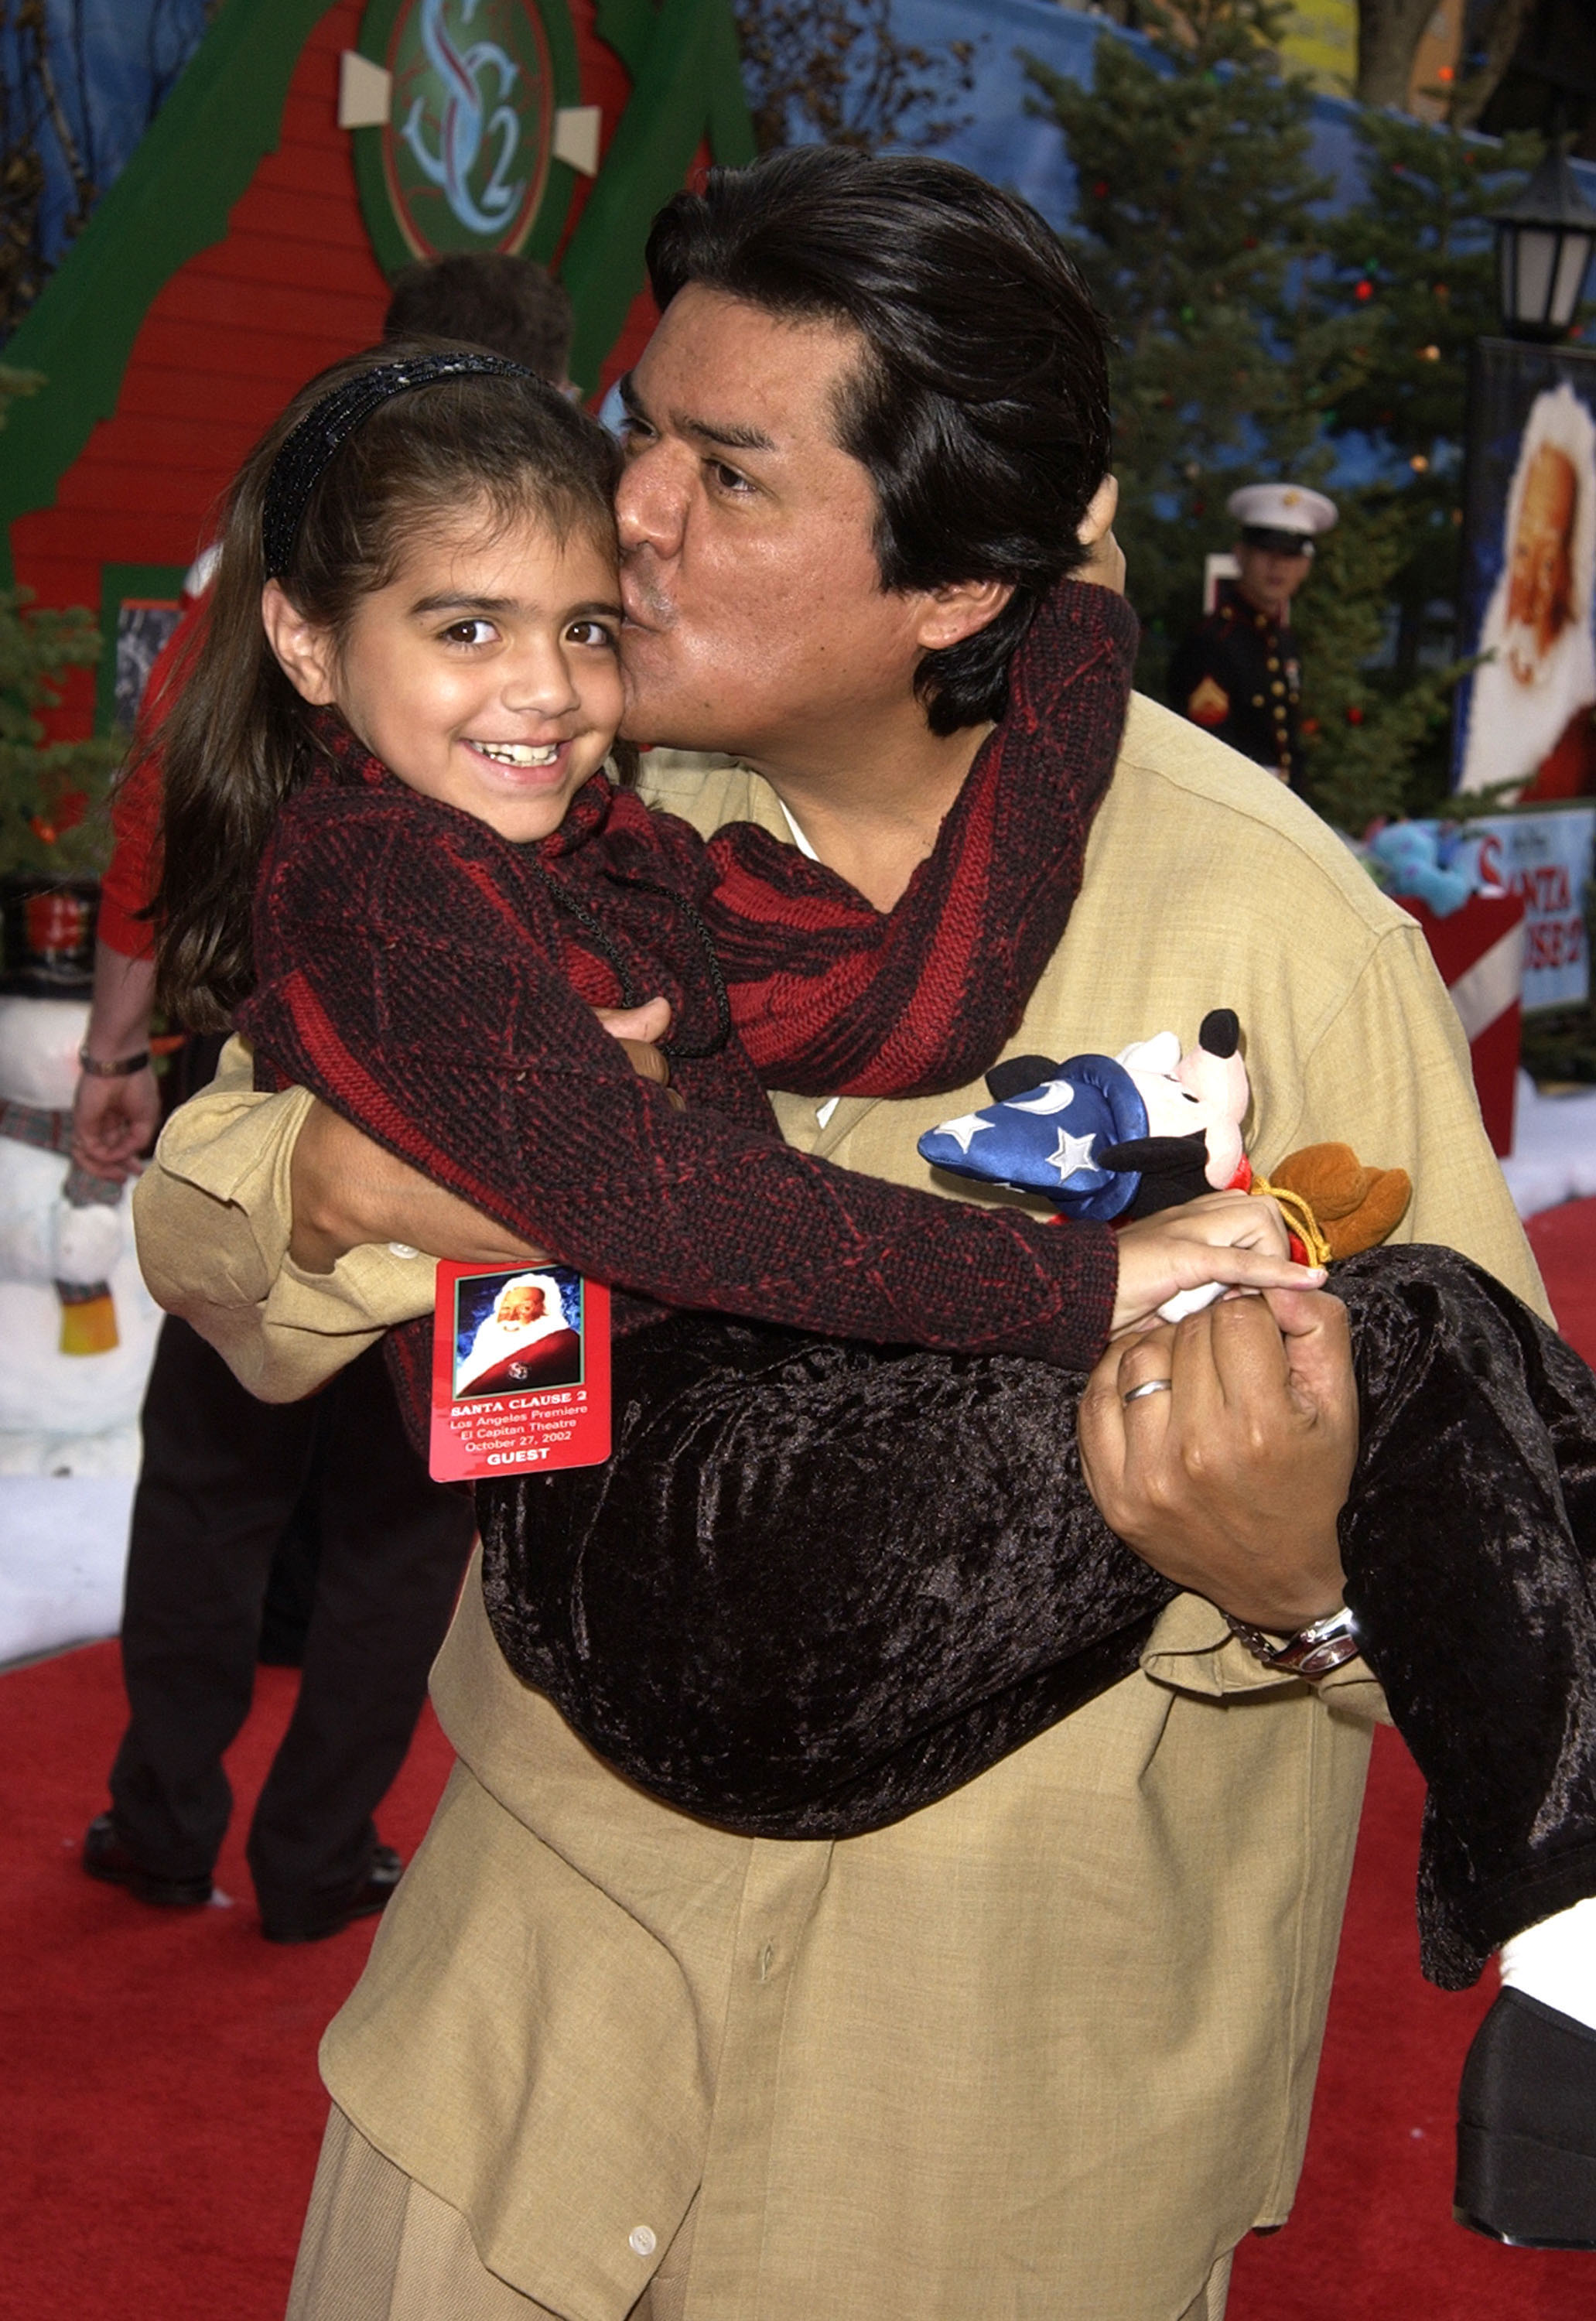 George Lopez & daughter Myan during "The Santa Clause 2" premiere at El Capitan Theatre in Hollywood, California | Source: Getty Images